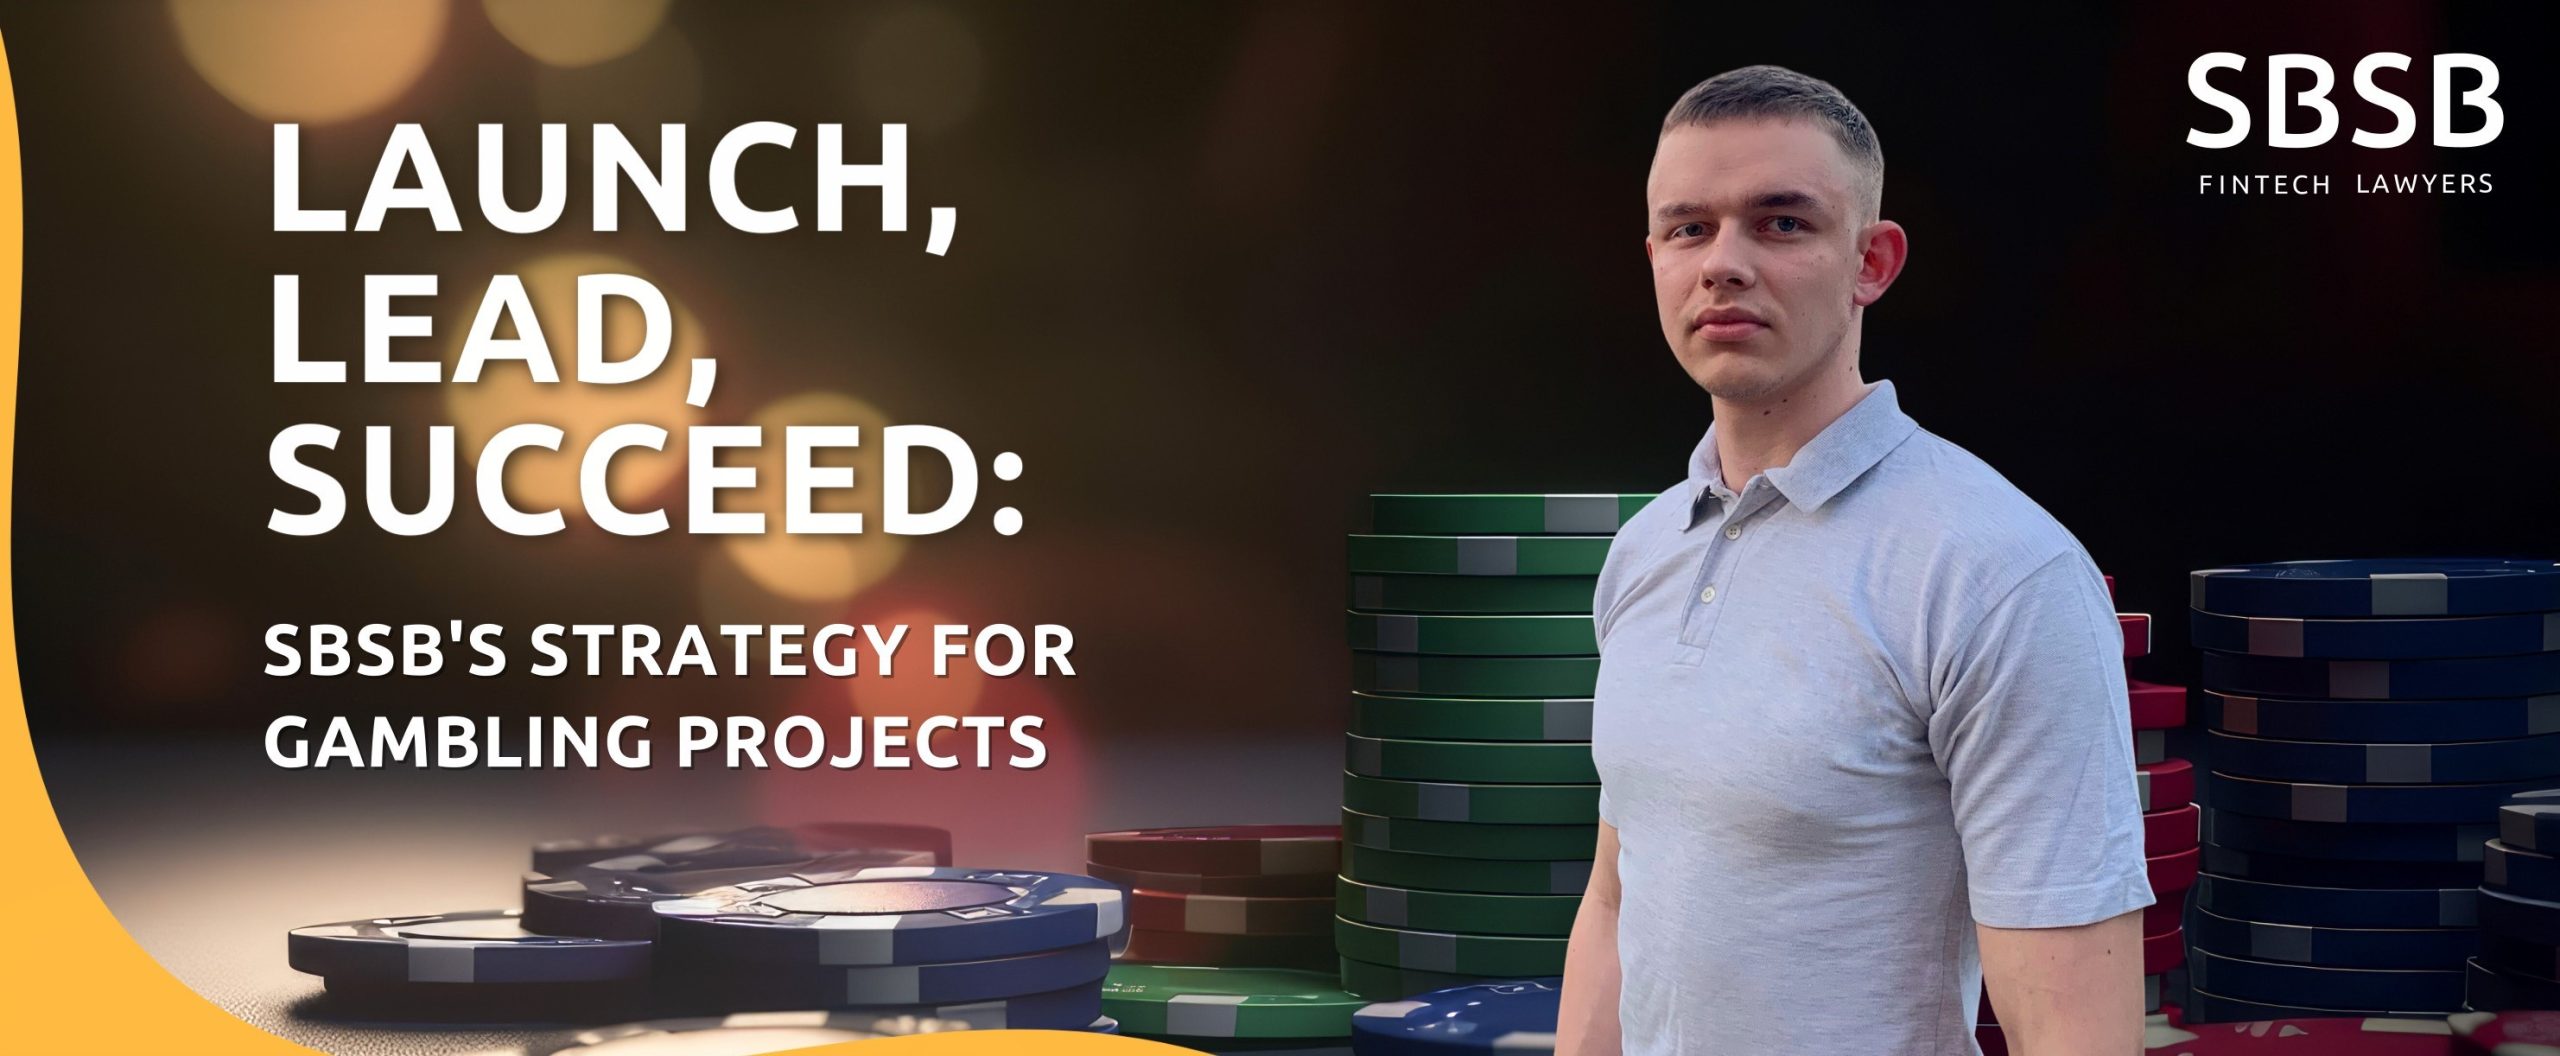 Launch, lead, succeed: SBSB’s strategy for gambling projects